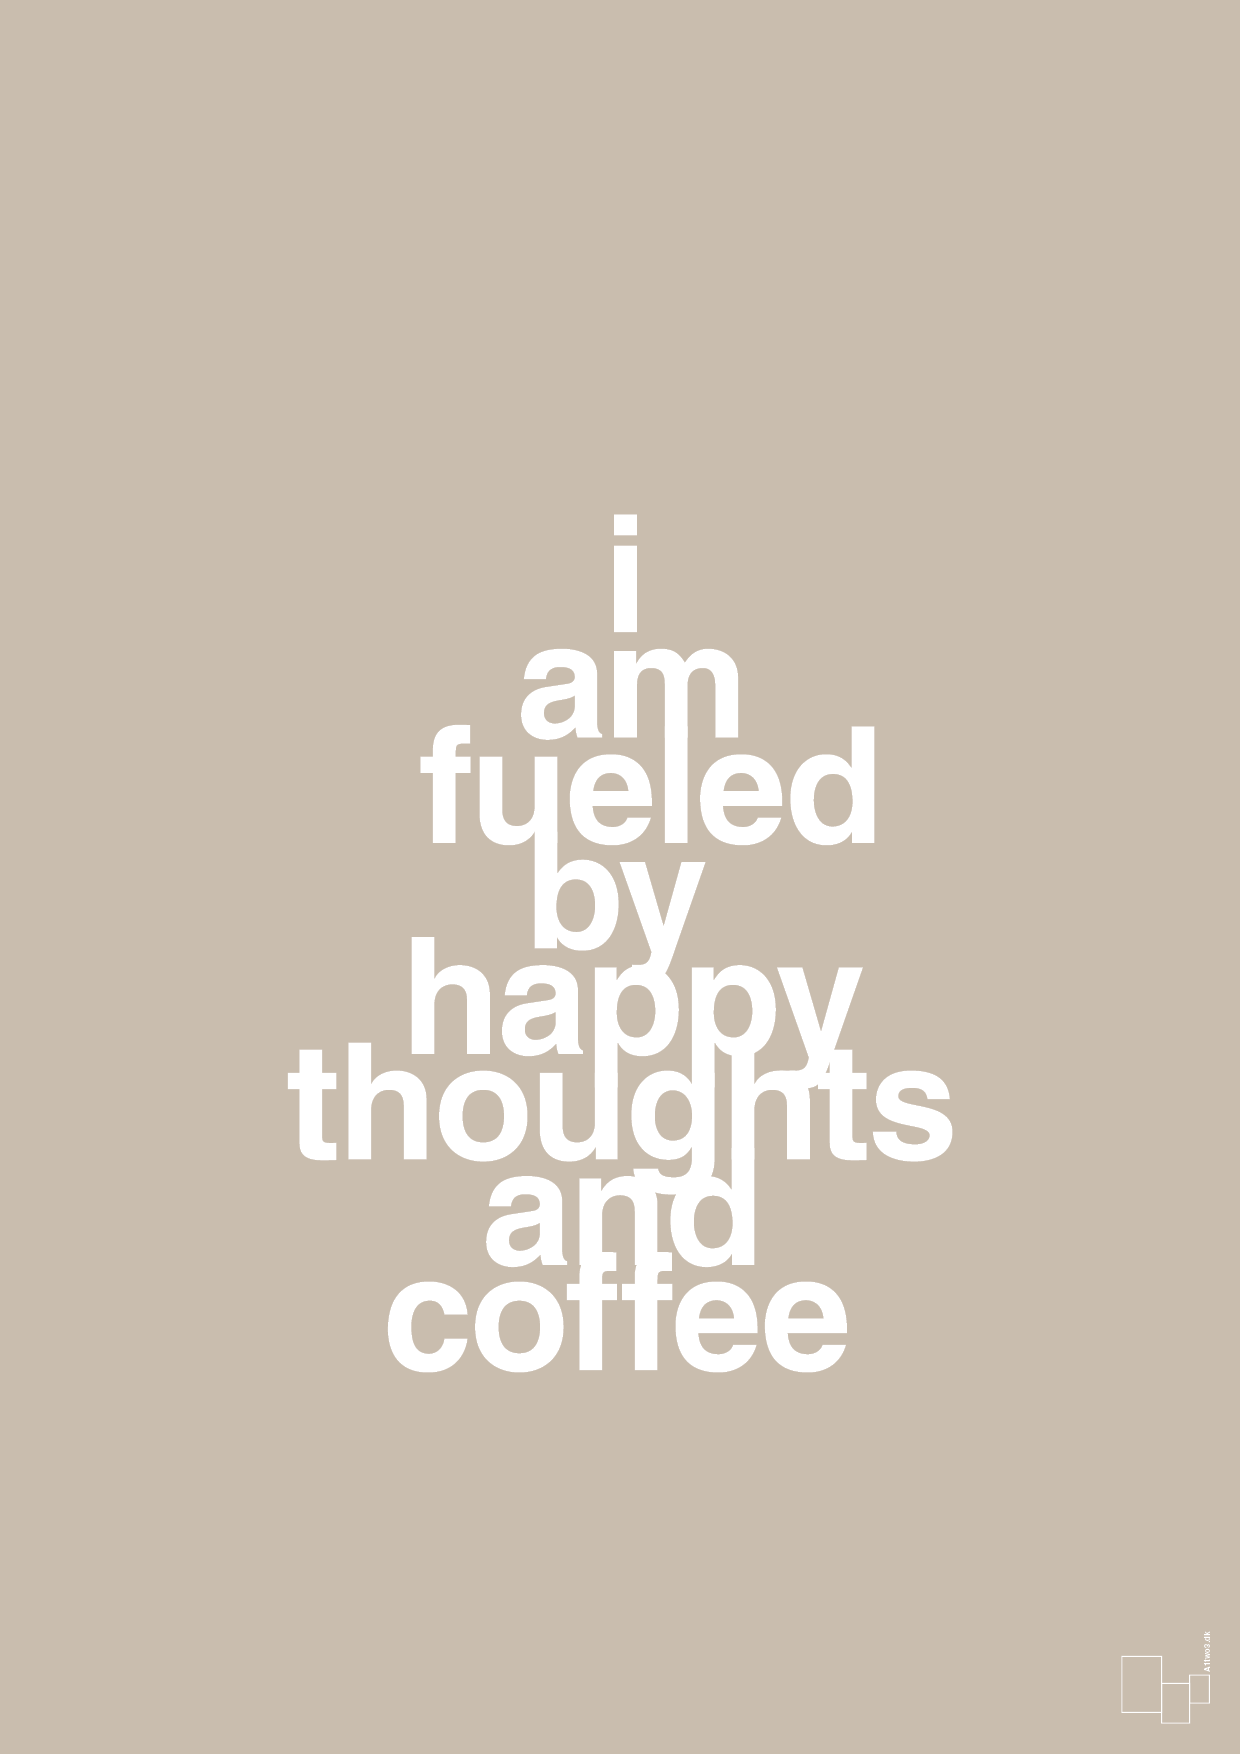 i am fueled by happy thoughts and coffee - Plakat med Mad & Drikke i Creamy Mushroom